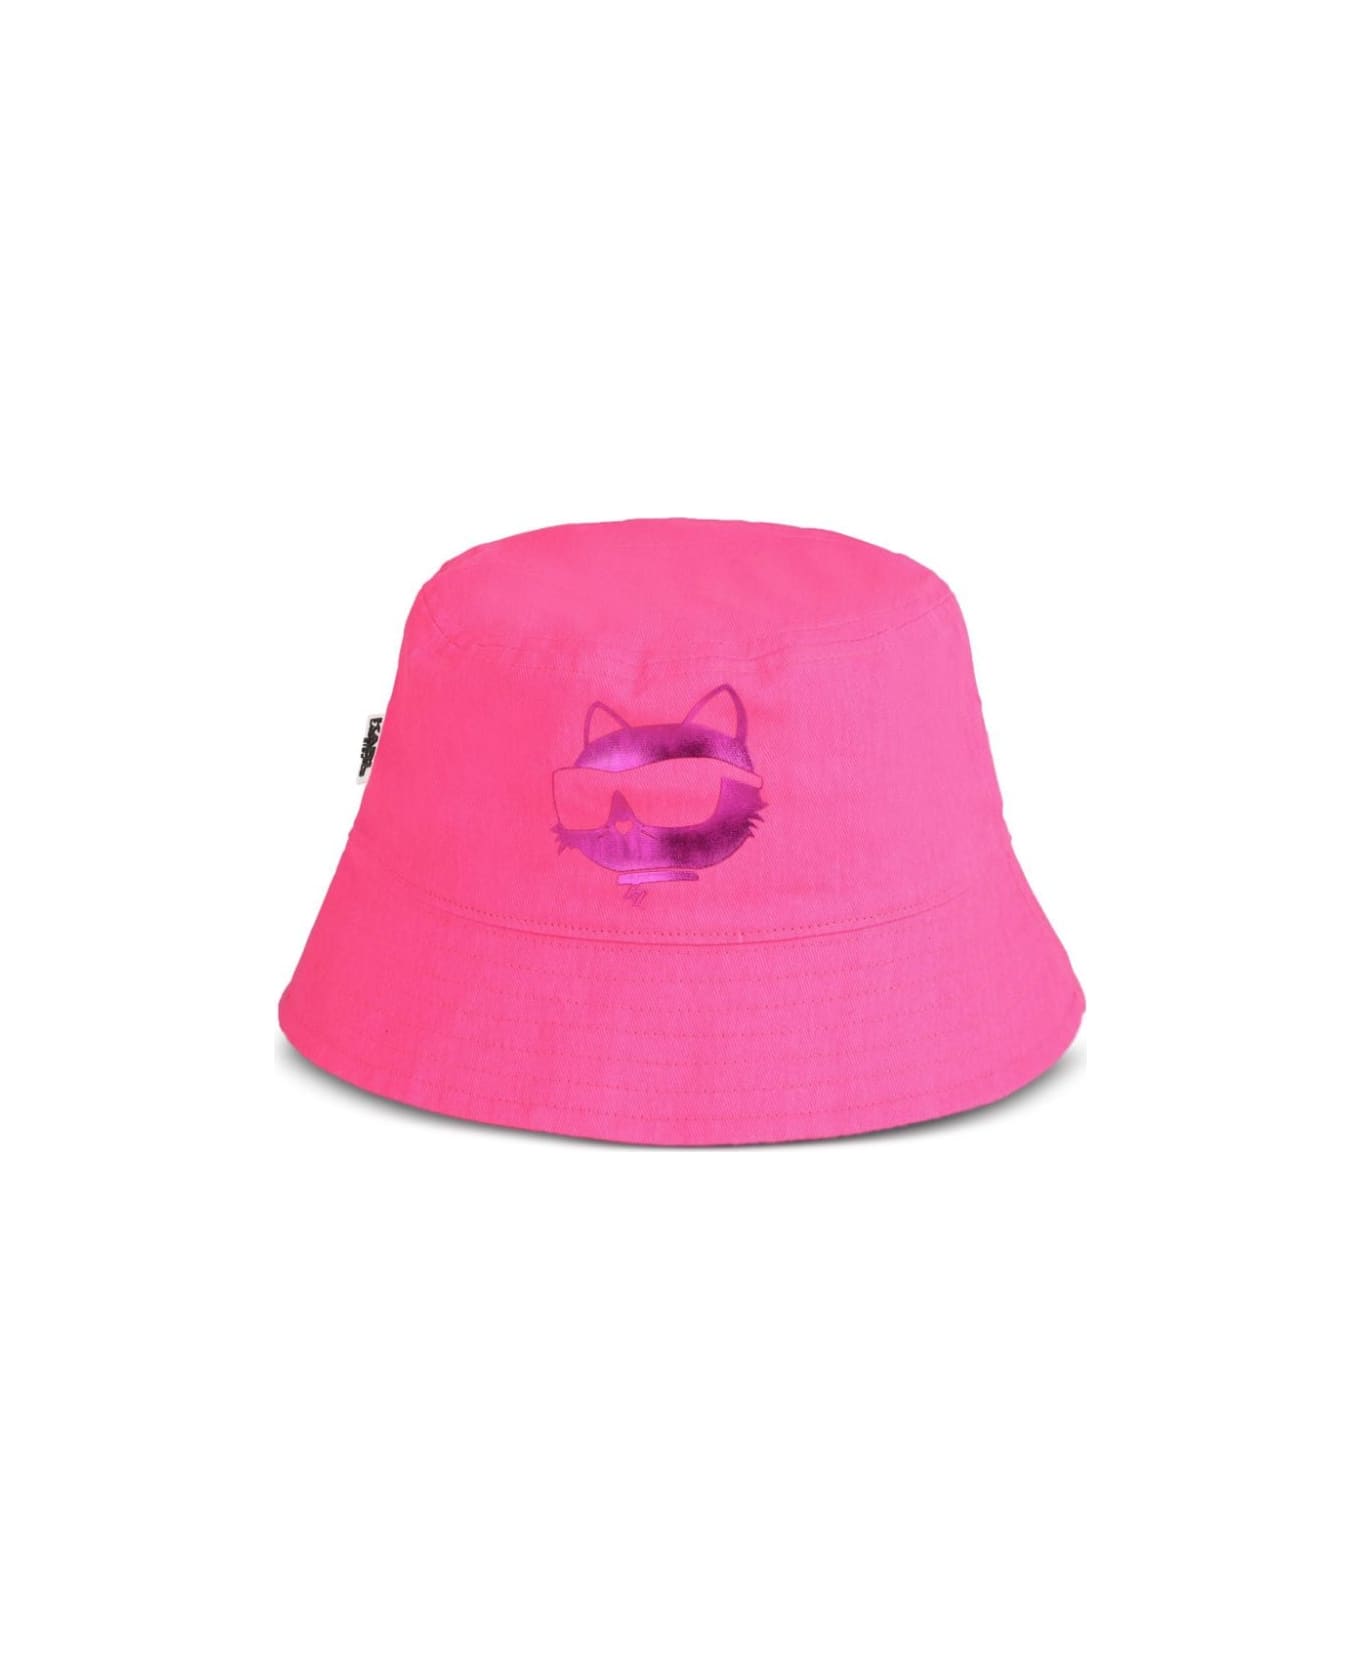 Karl Lagerfeld Kids Cappello Con Logo - Pink アクセサリー＆ギフト